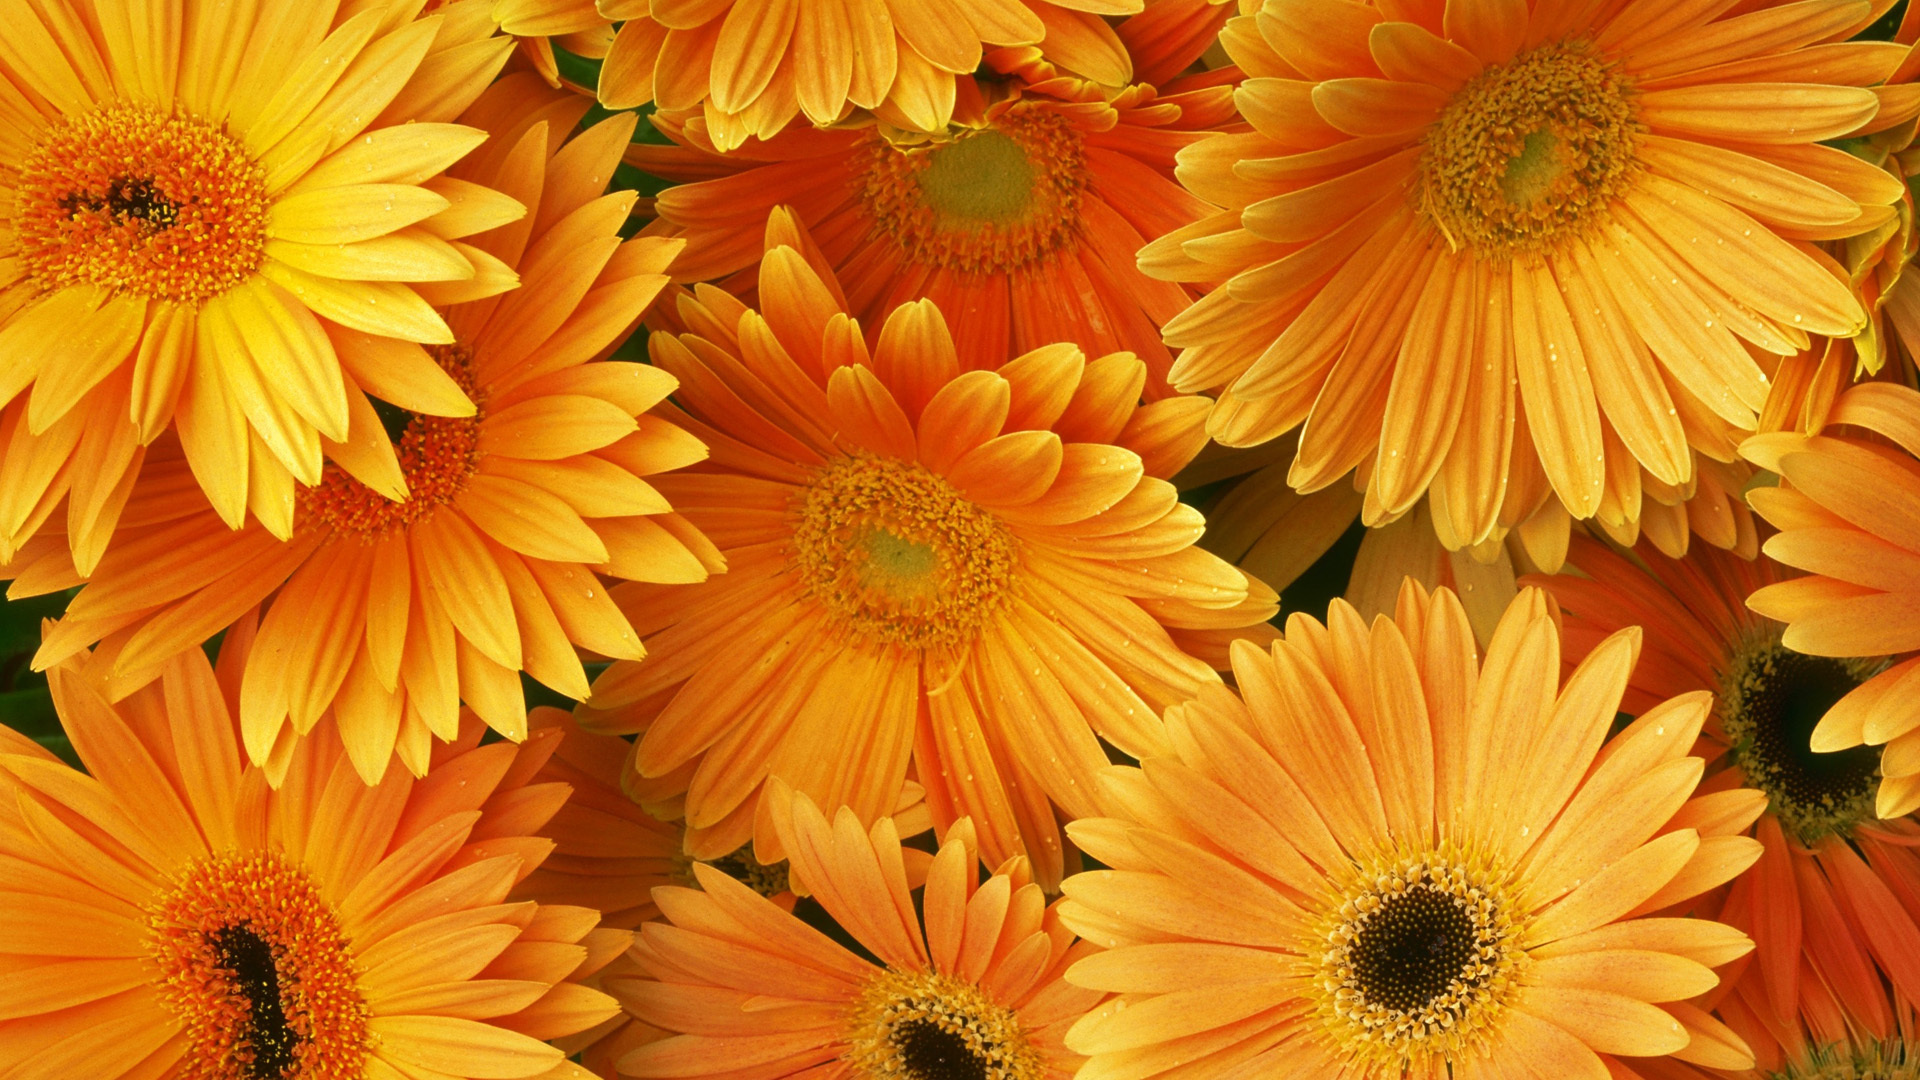 Hd Orange Flowers Wallpapers And Photos - Good Afternoon Wishes Friend , HD Wallpaper & Backgrounds